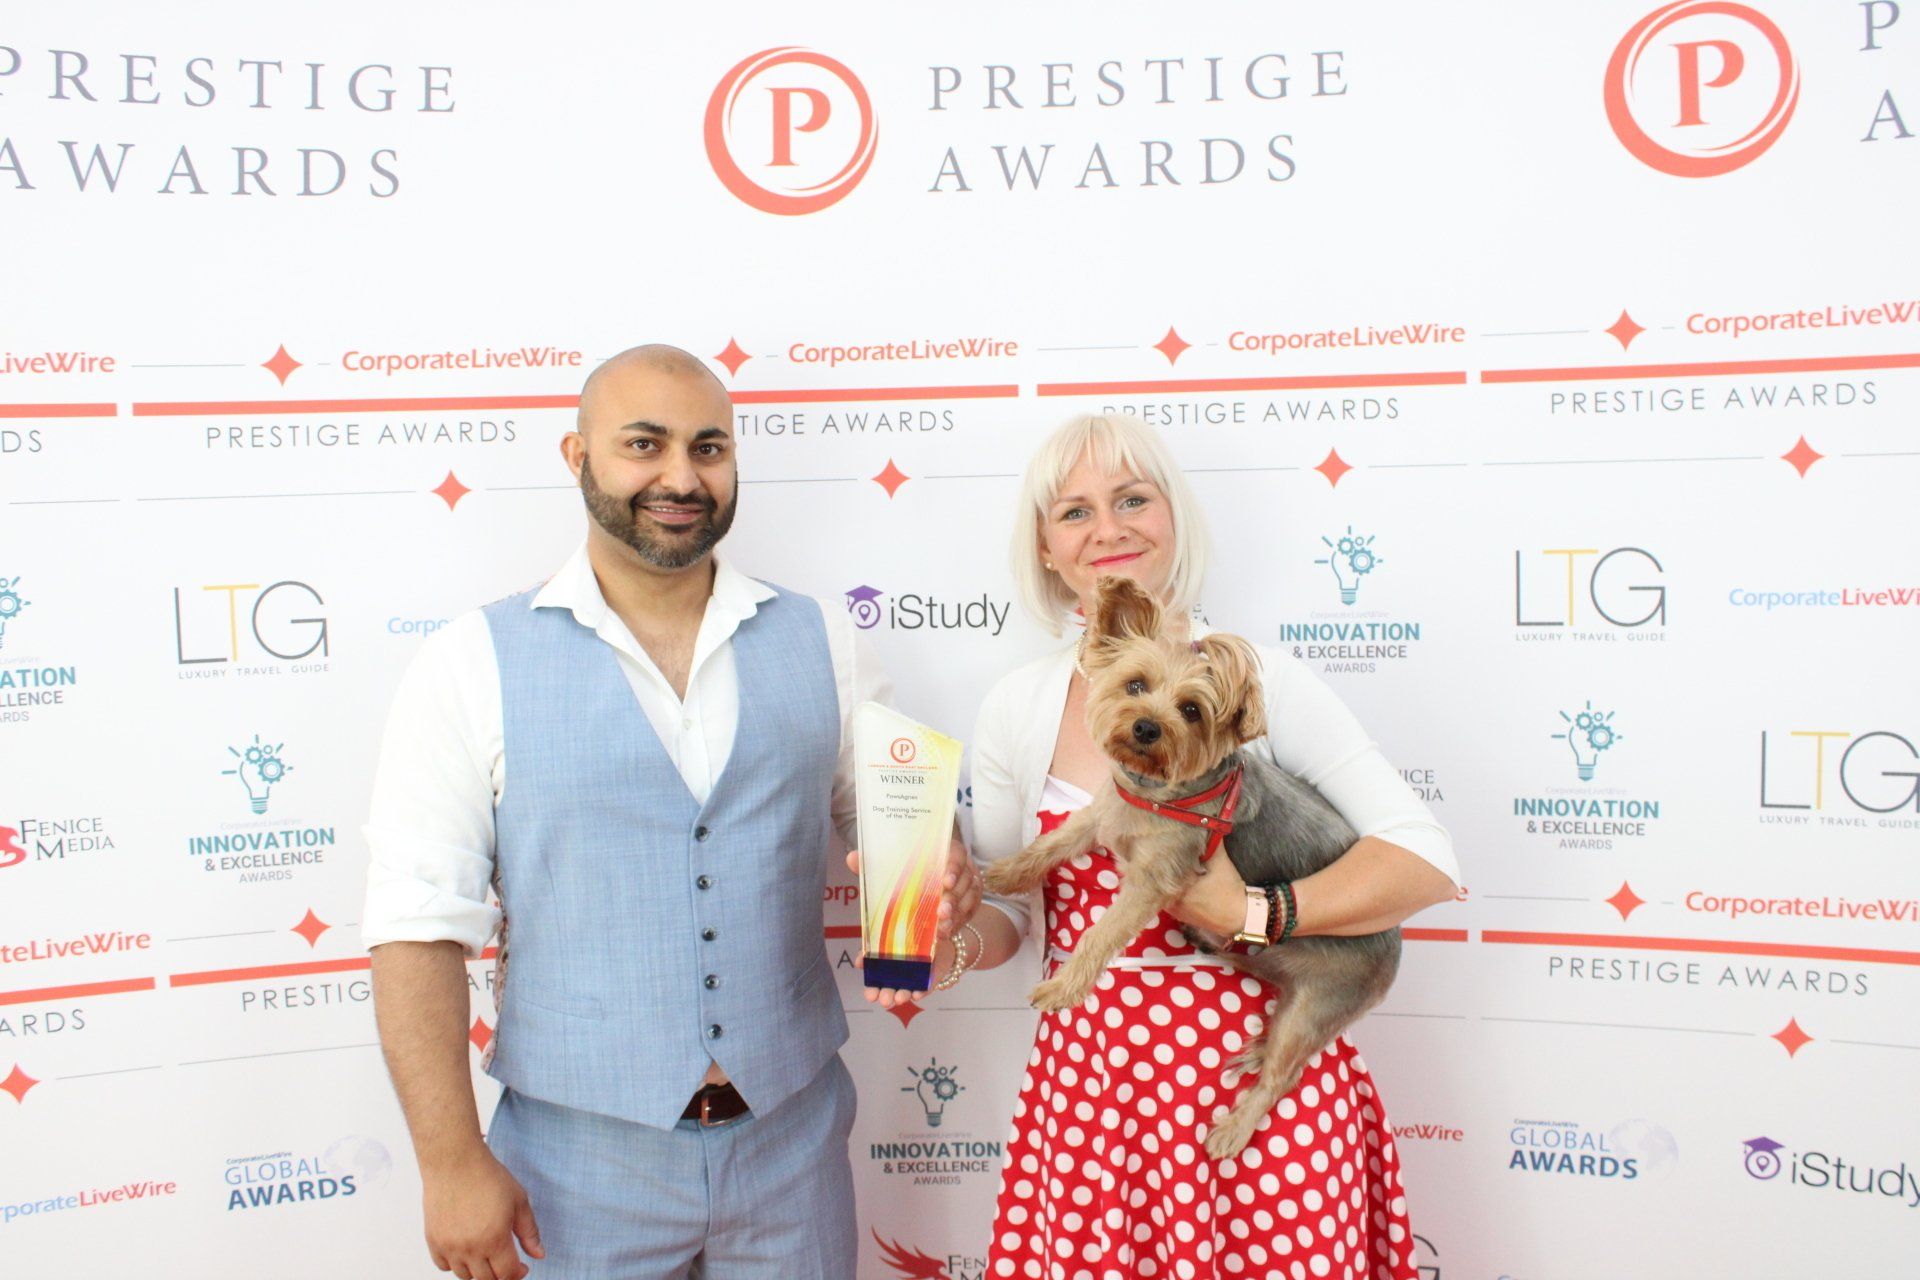 A woman in a spotty dress holding her small dog under one arm and a dog service provider award in the other hand.